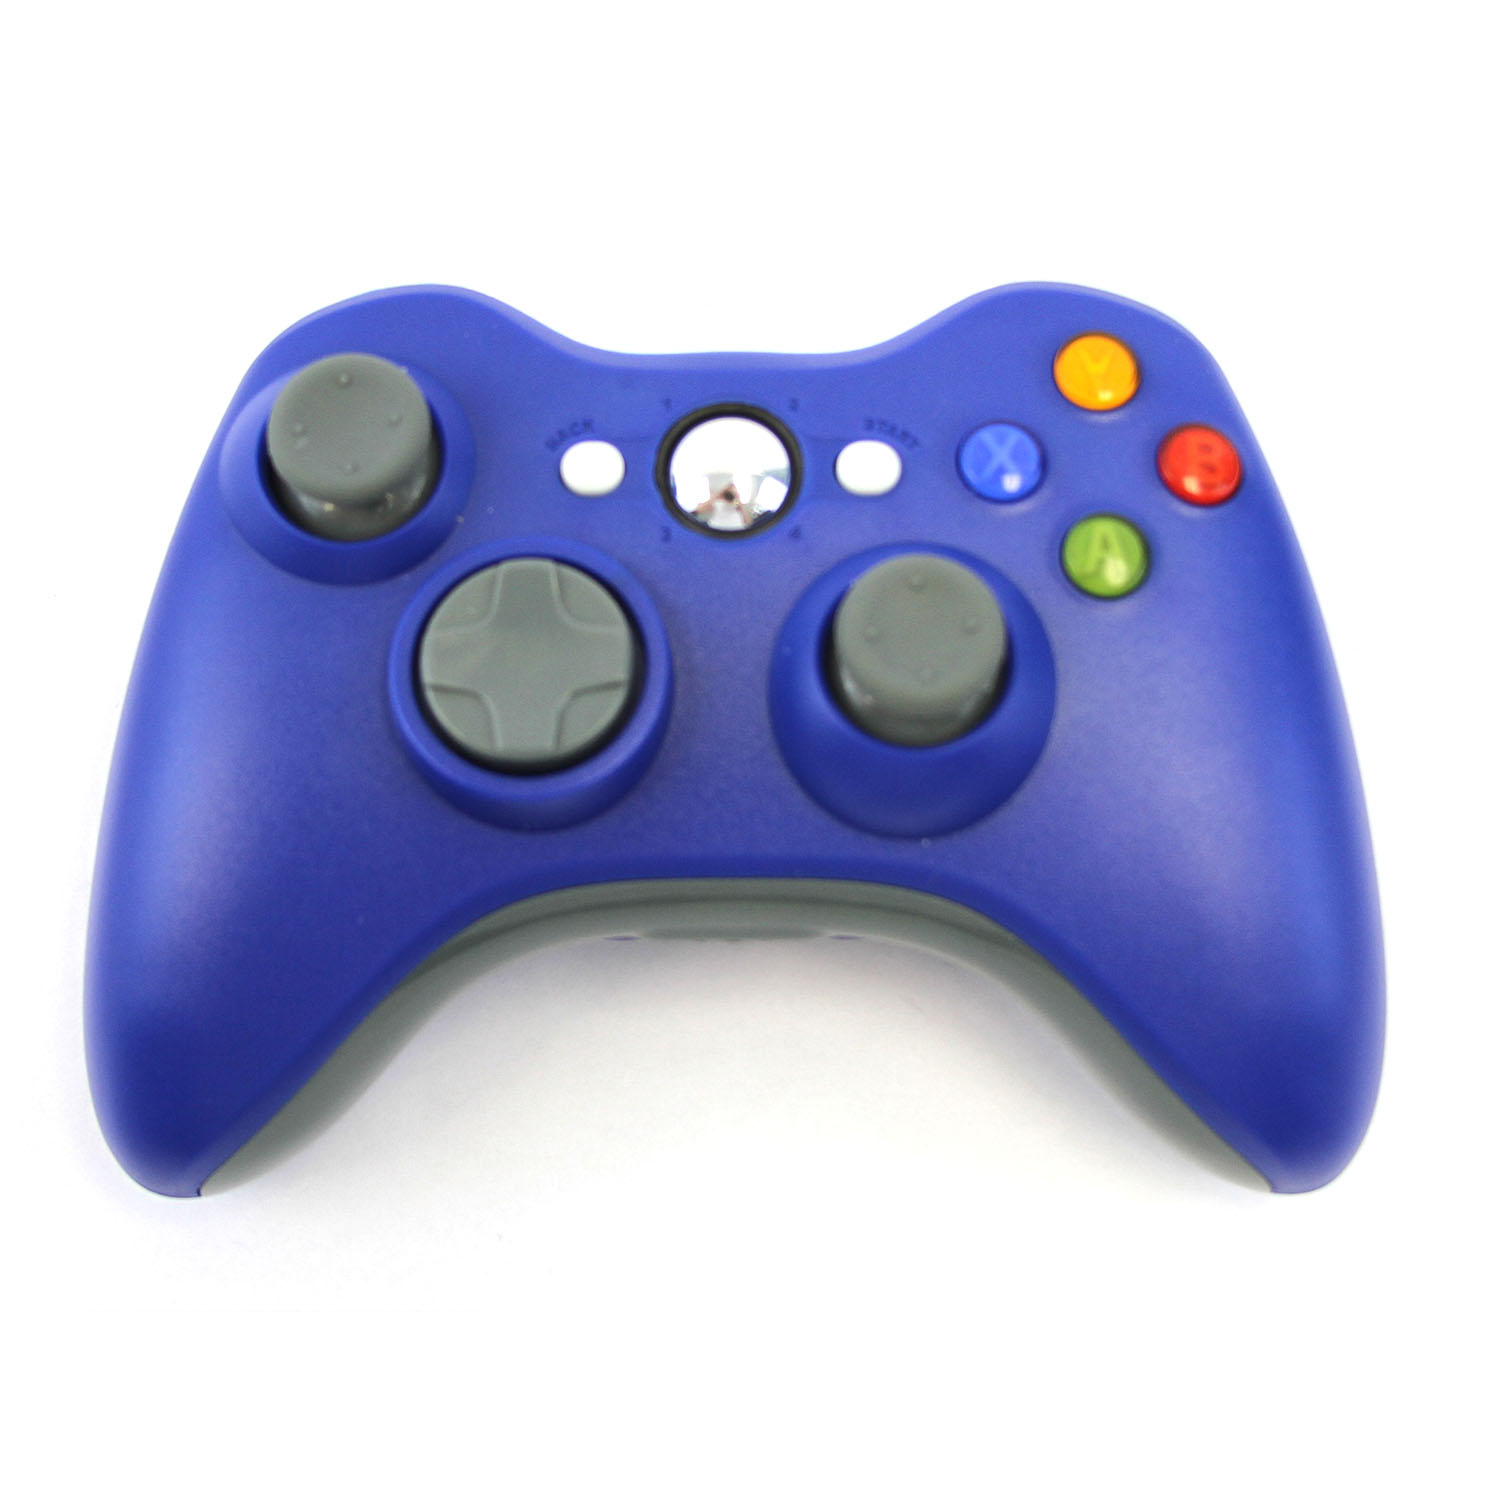 geforce now for mac xbox 360 wireless controller